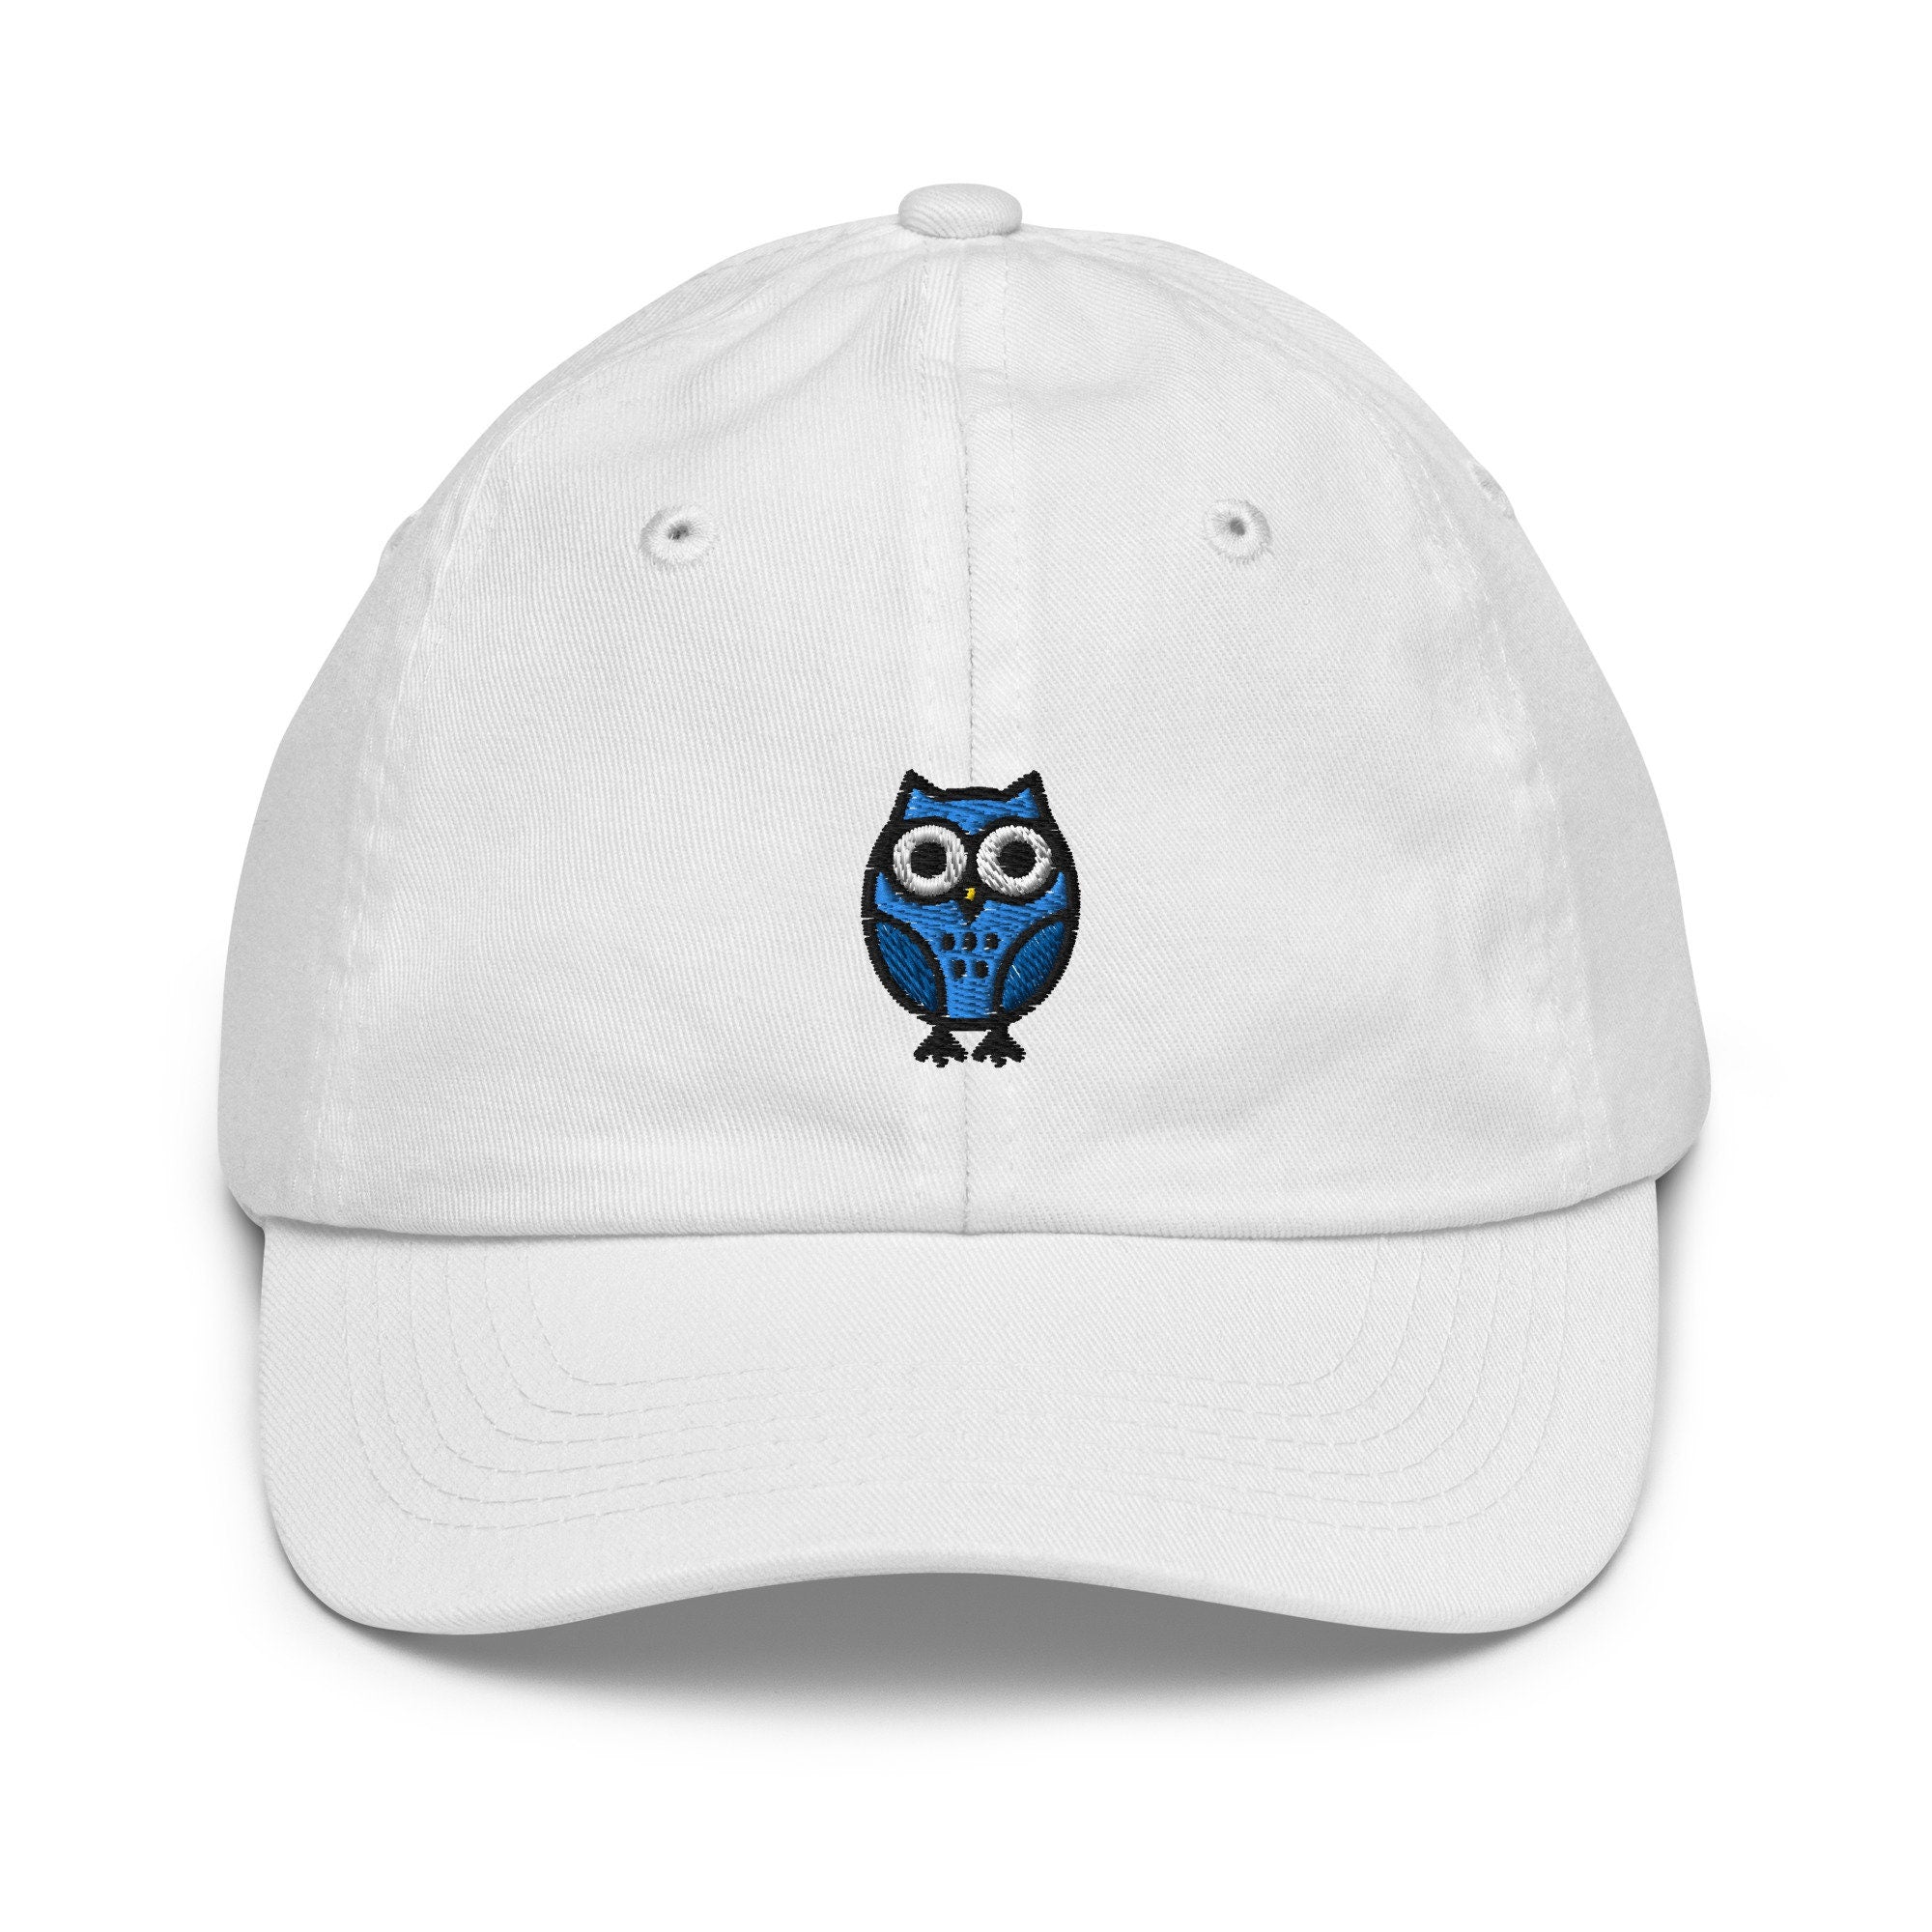 Owl Youth Baseball Cap, Handmade Kids Hat, Embroidered Childrens Hat Gift - Multiple Colors